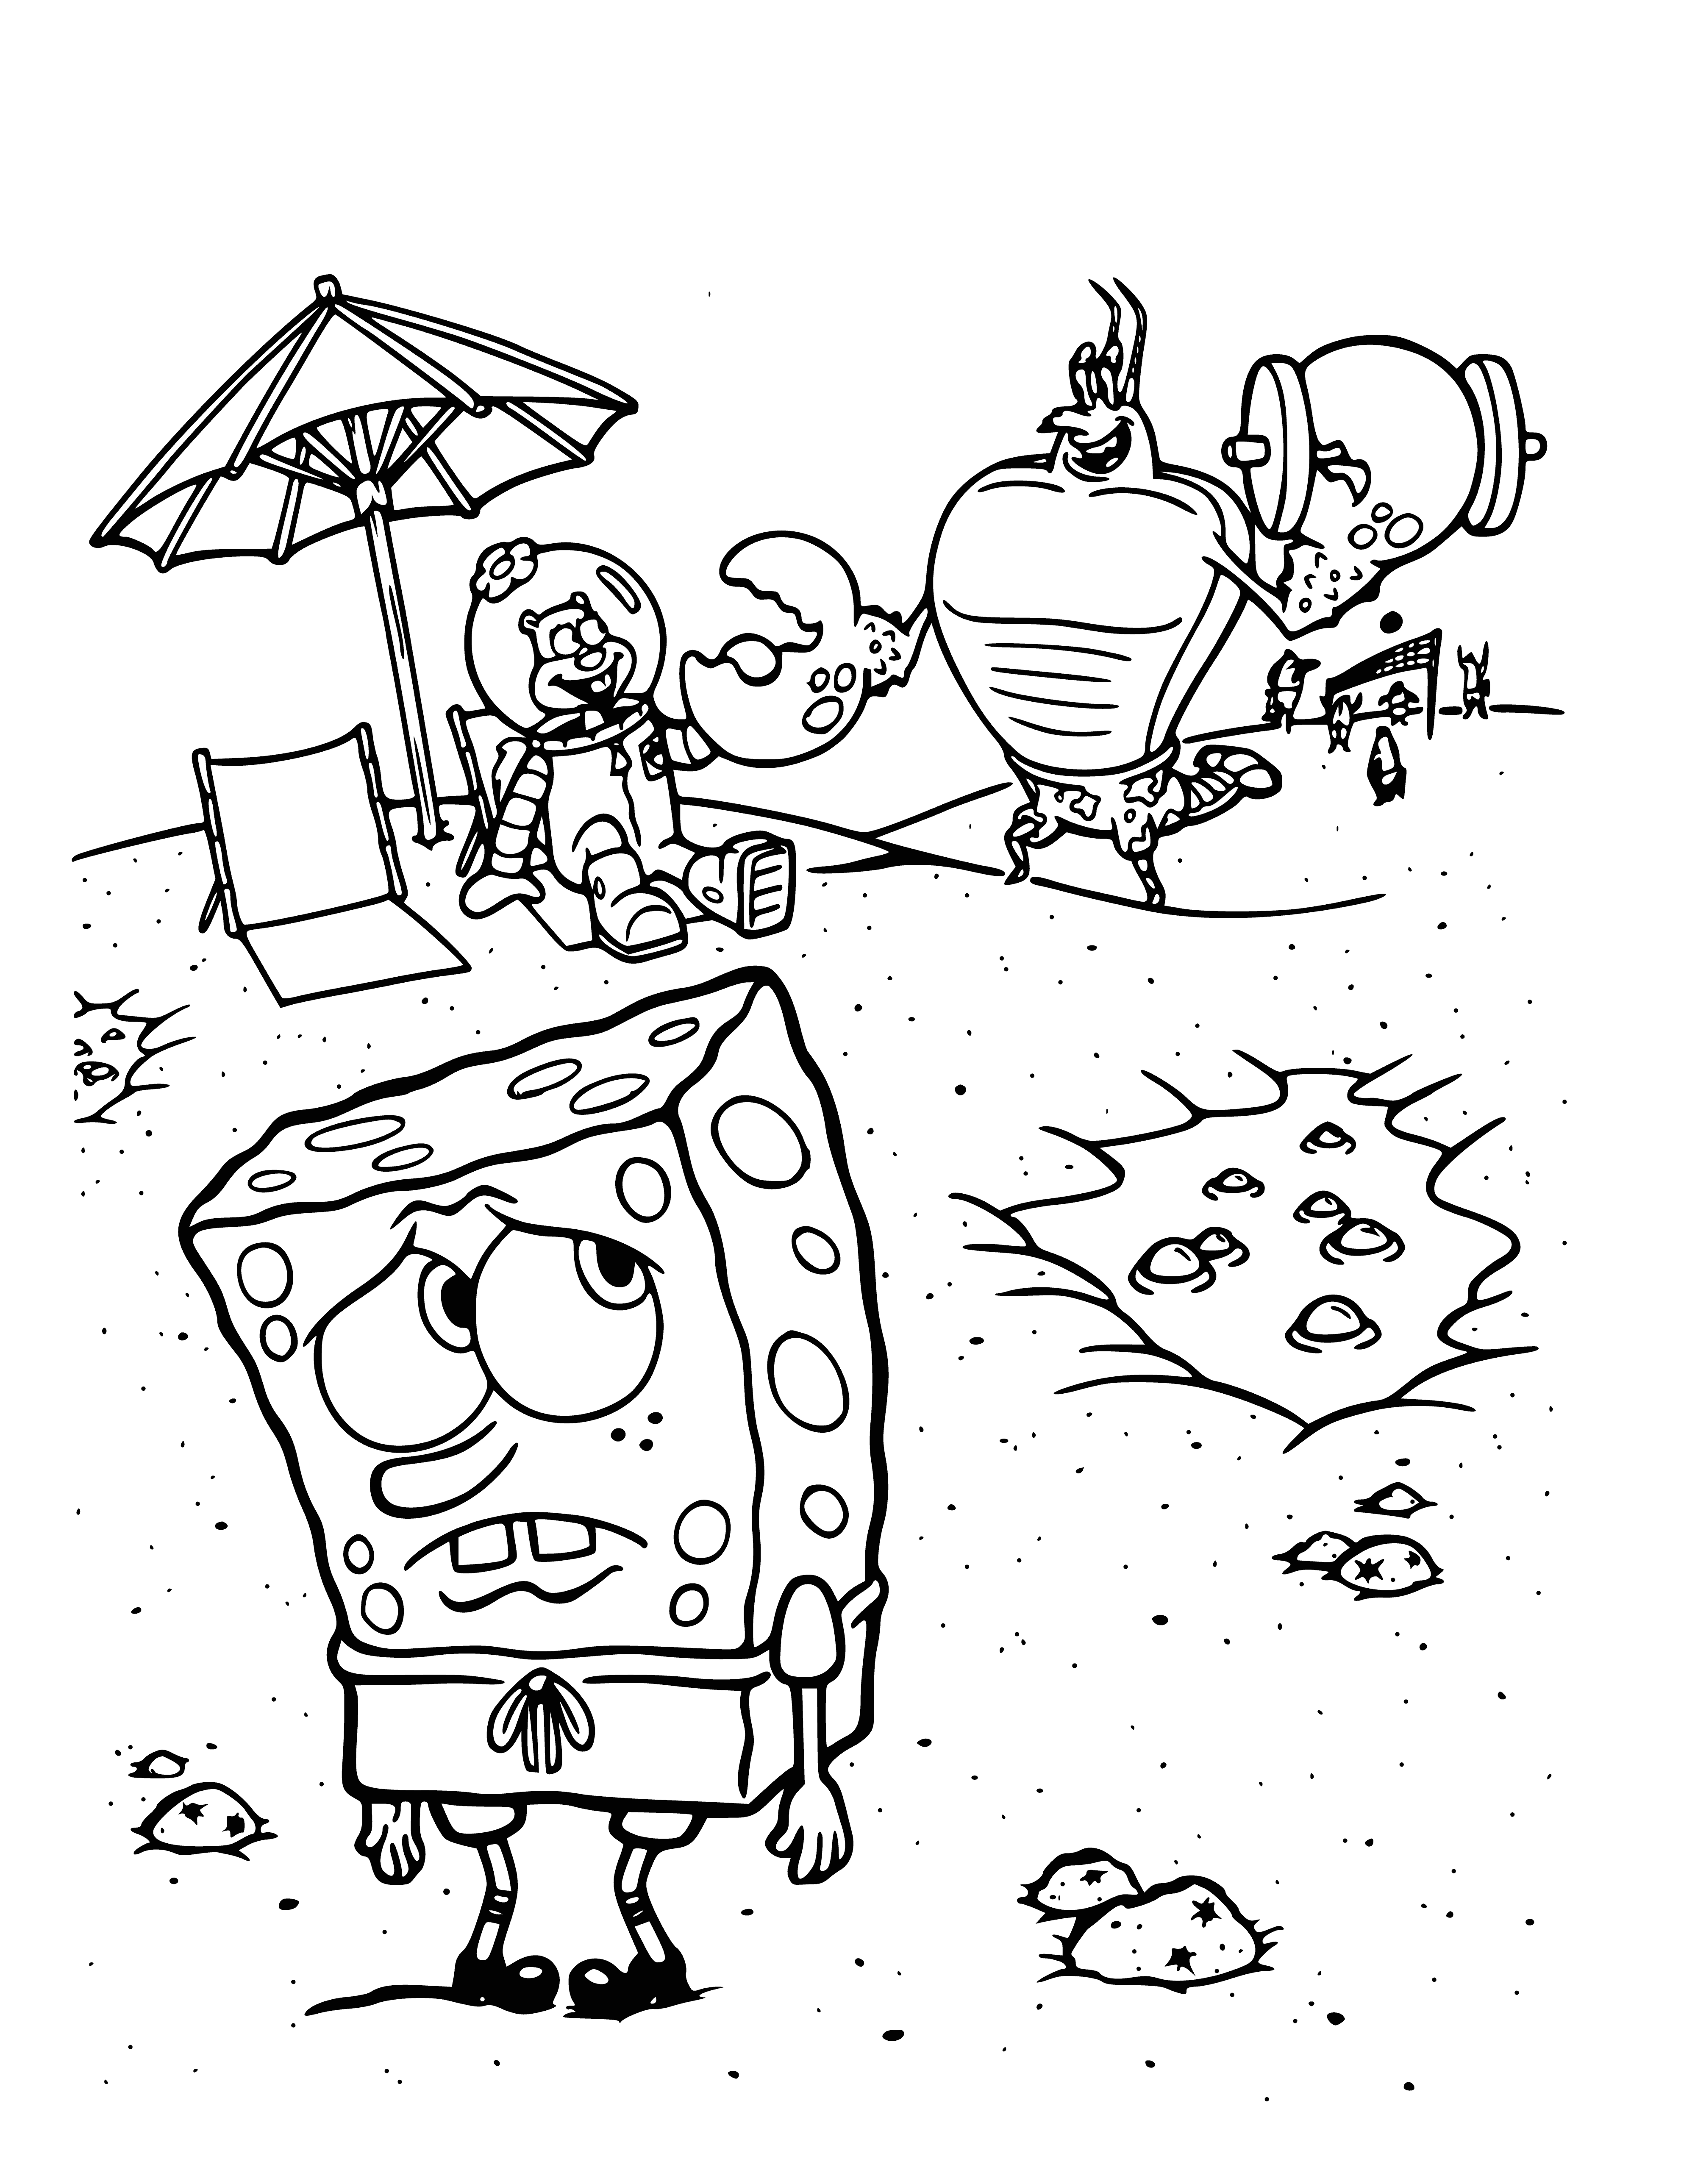 coloring page: SpongeBob Squarepants is a yellow character with big eyes & smile, wearing a red tie & brown pants. Looks happy & friendly. #SpongeBob